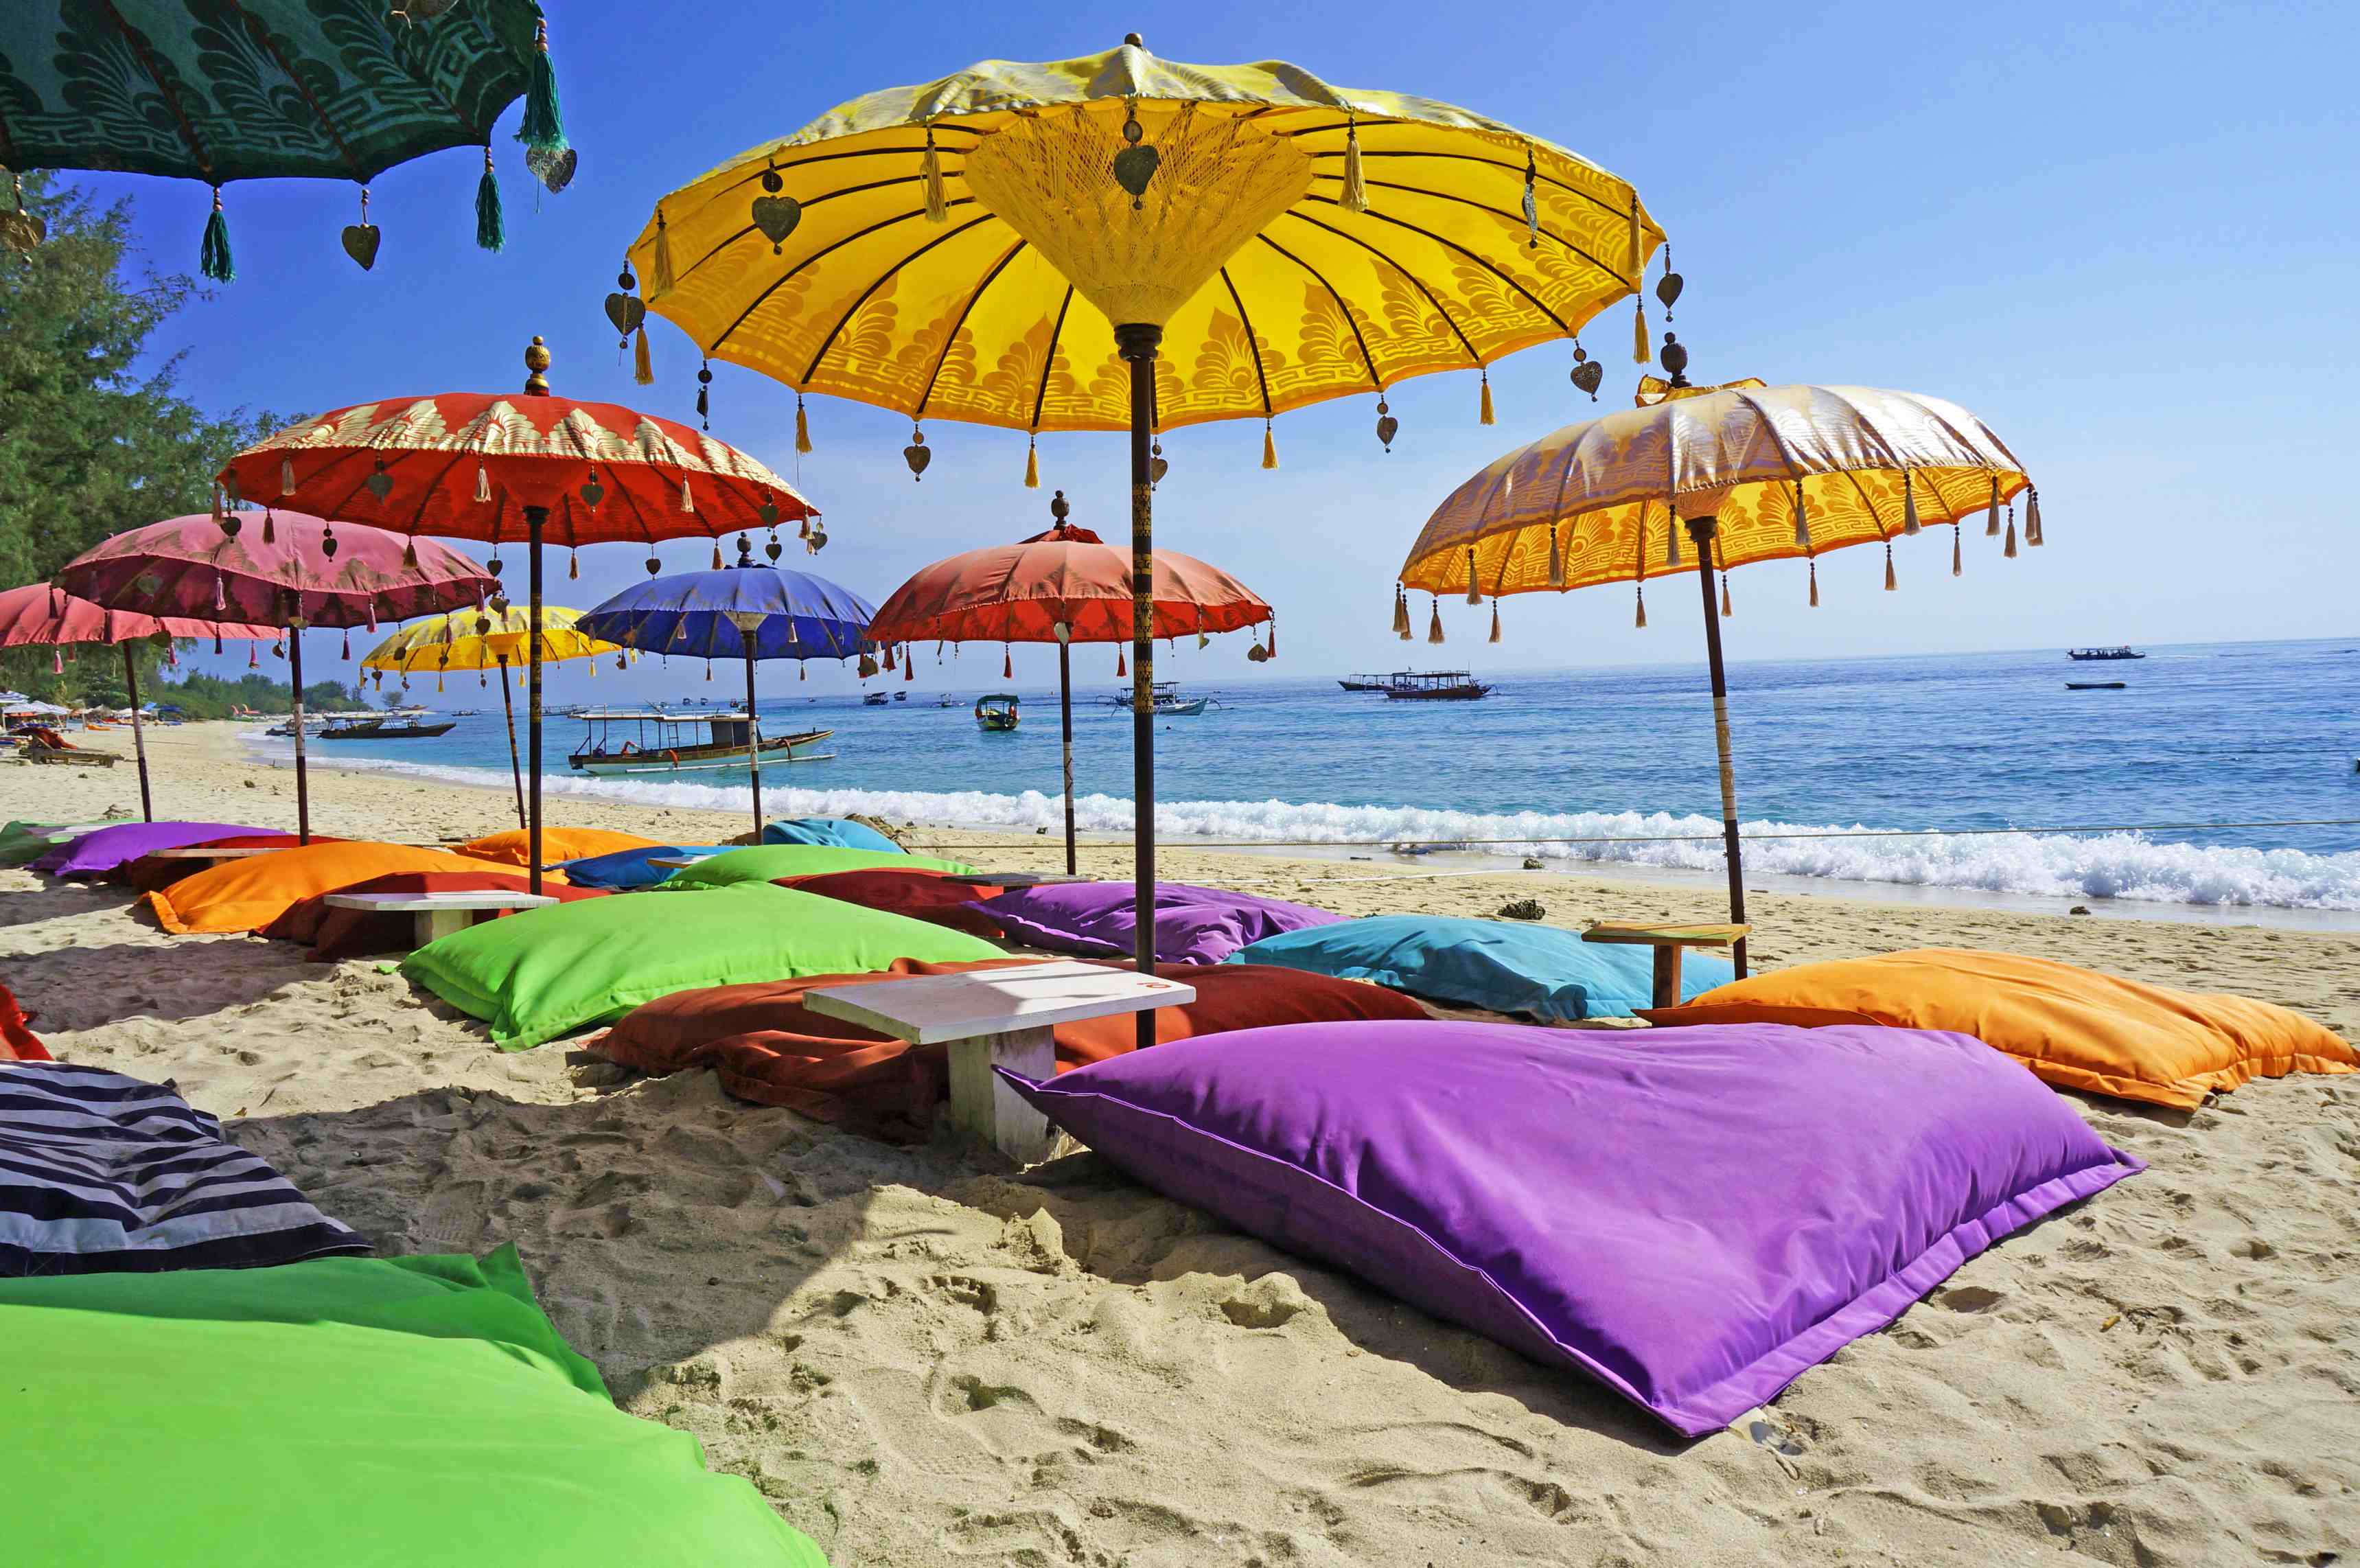 This image shows some colourful beach umbrellas and sand pillows in a pristine tropical beach bathed by the Bali sea.